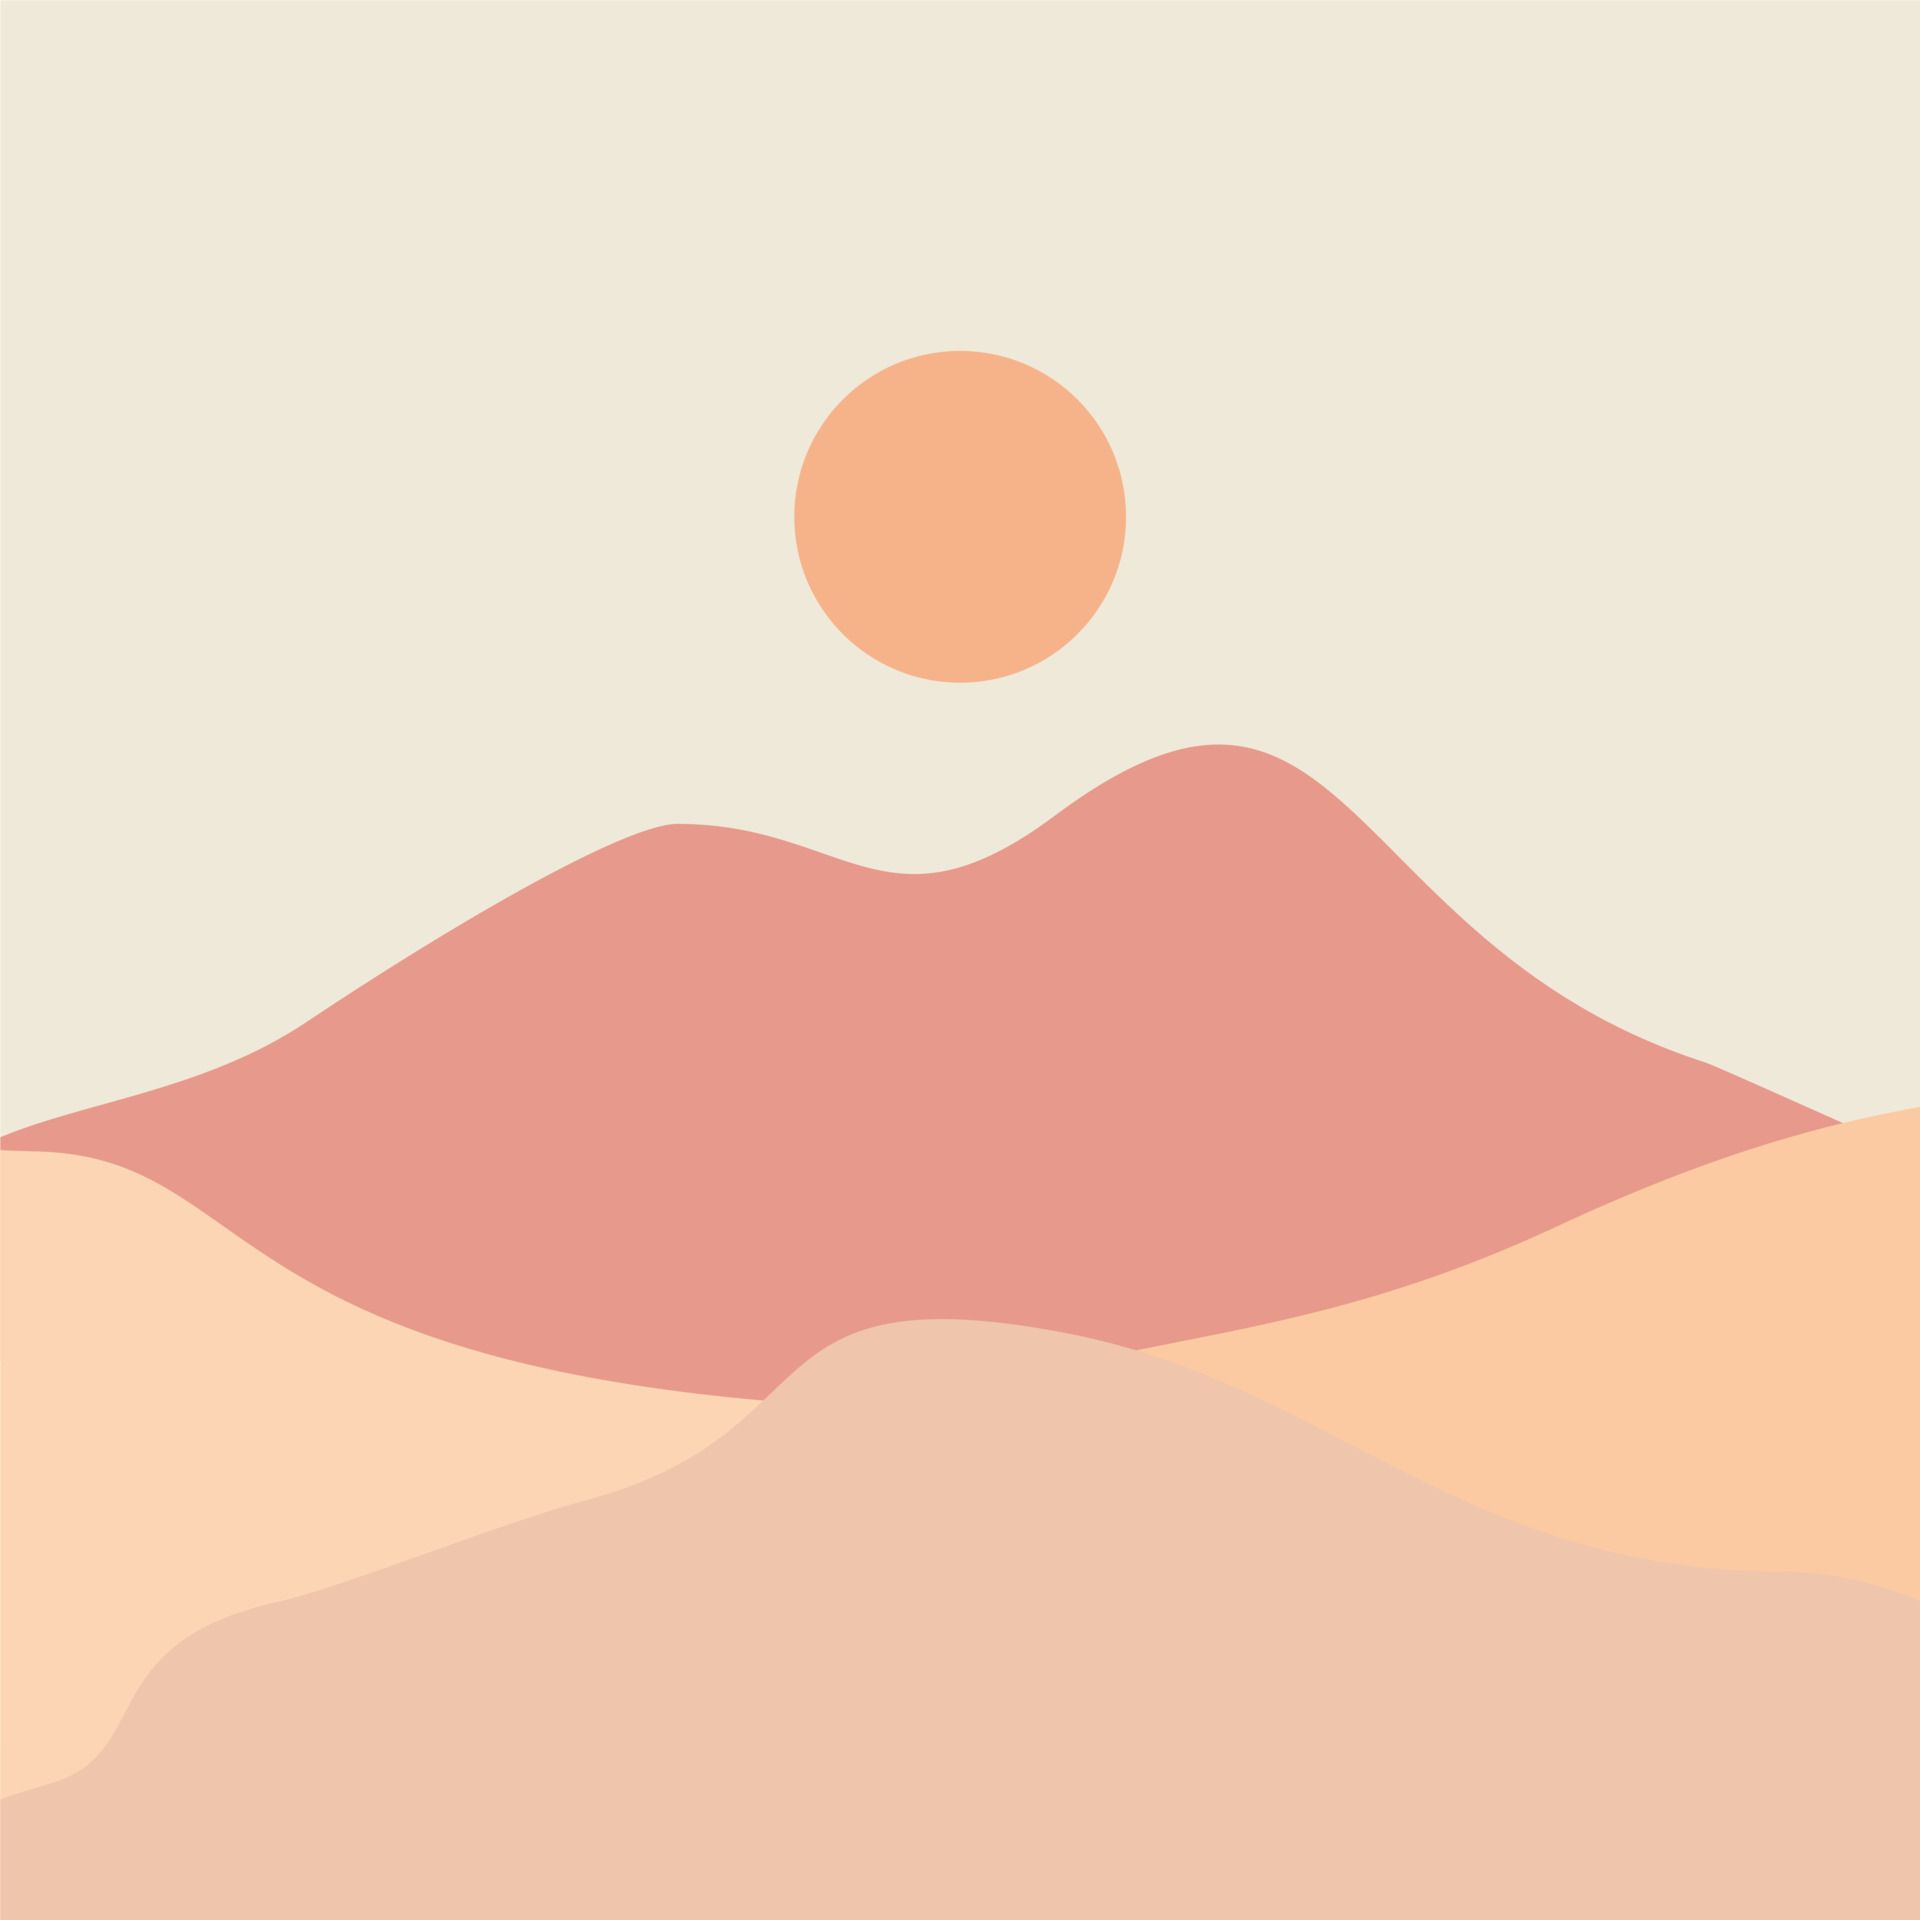 A sunset over the desert with mountains in it - Desert